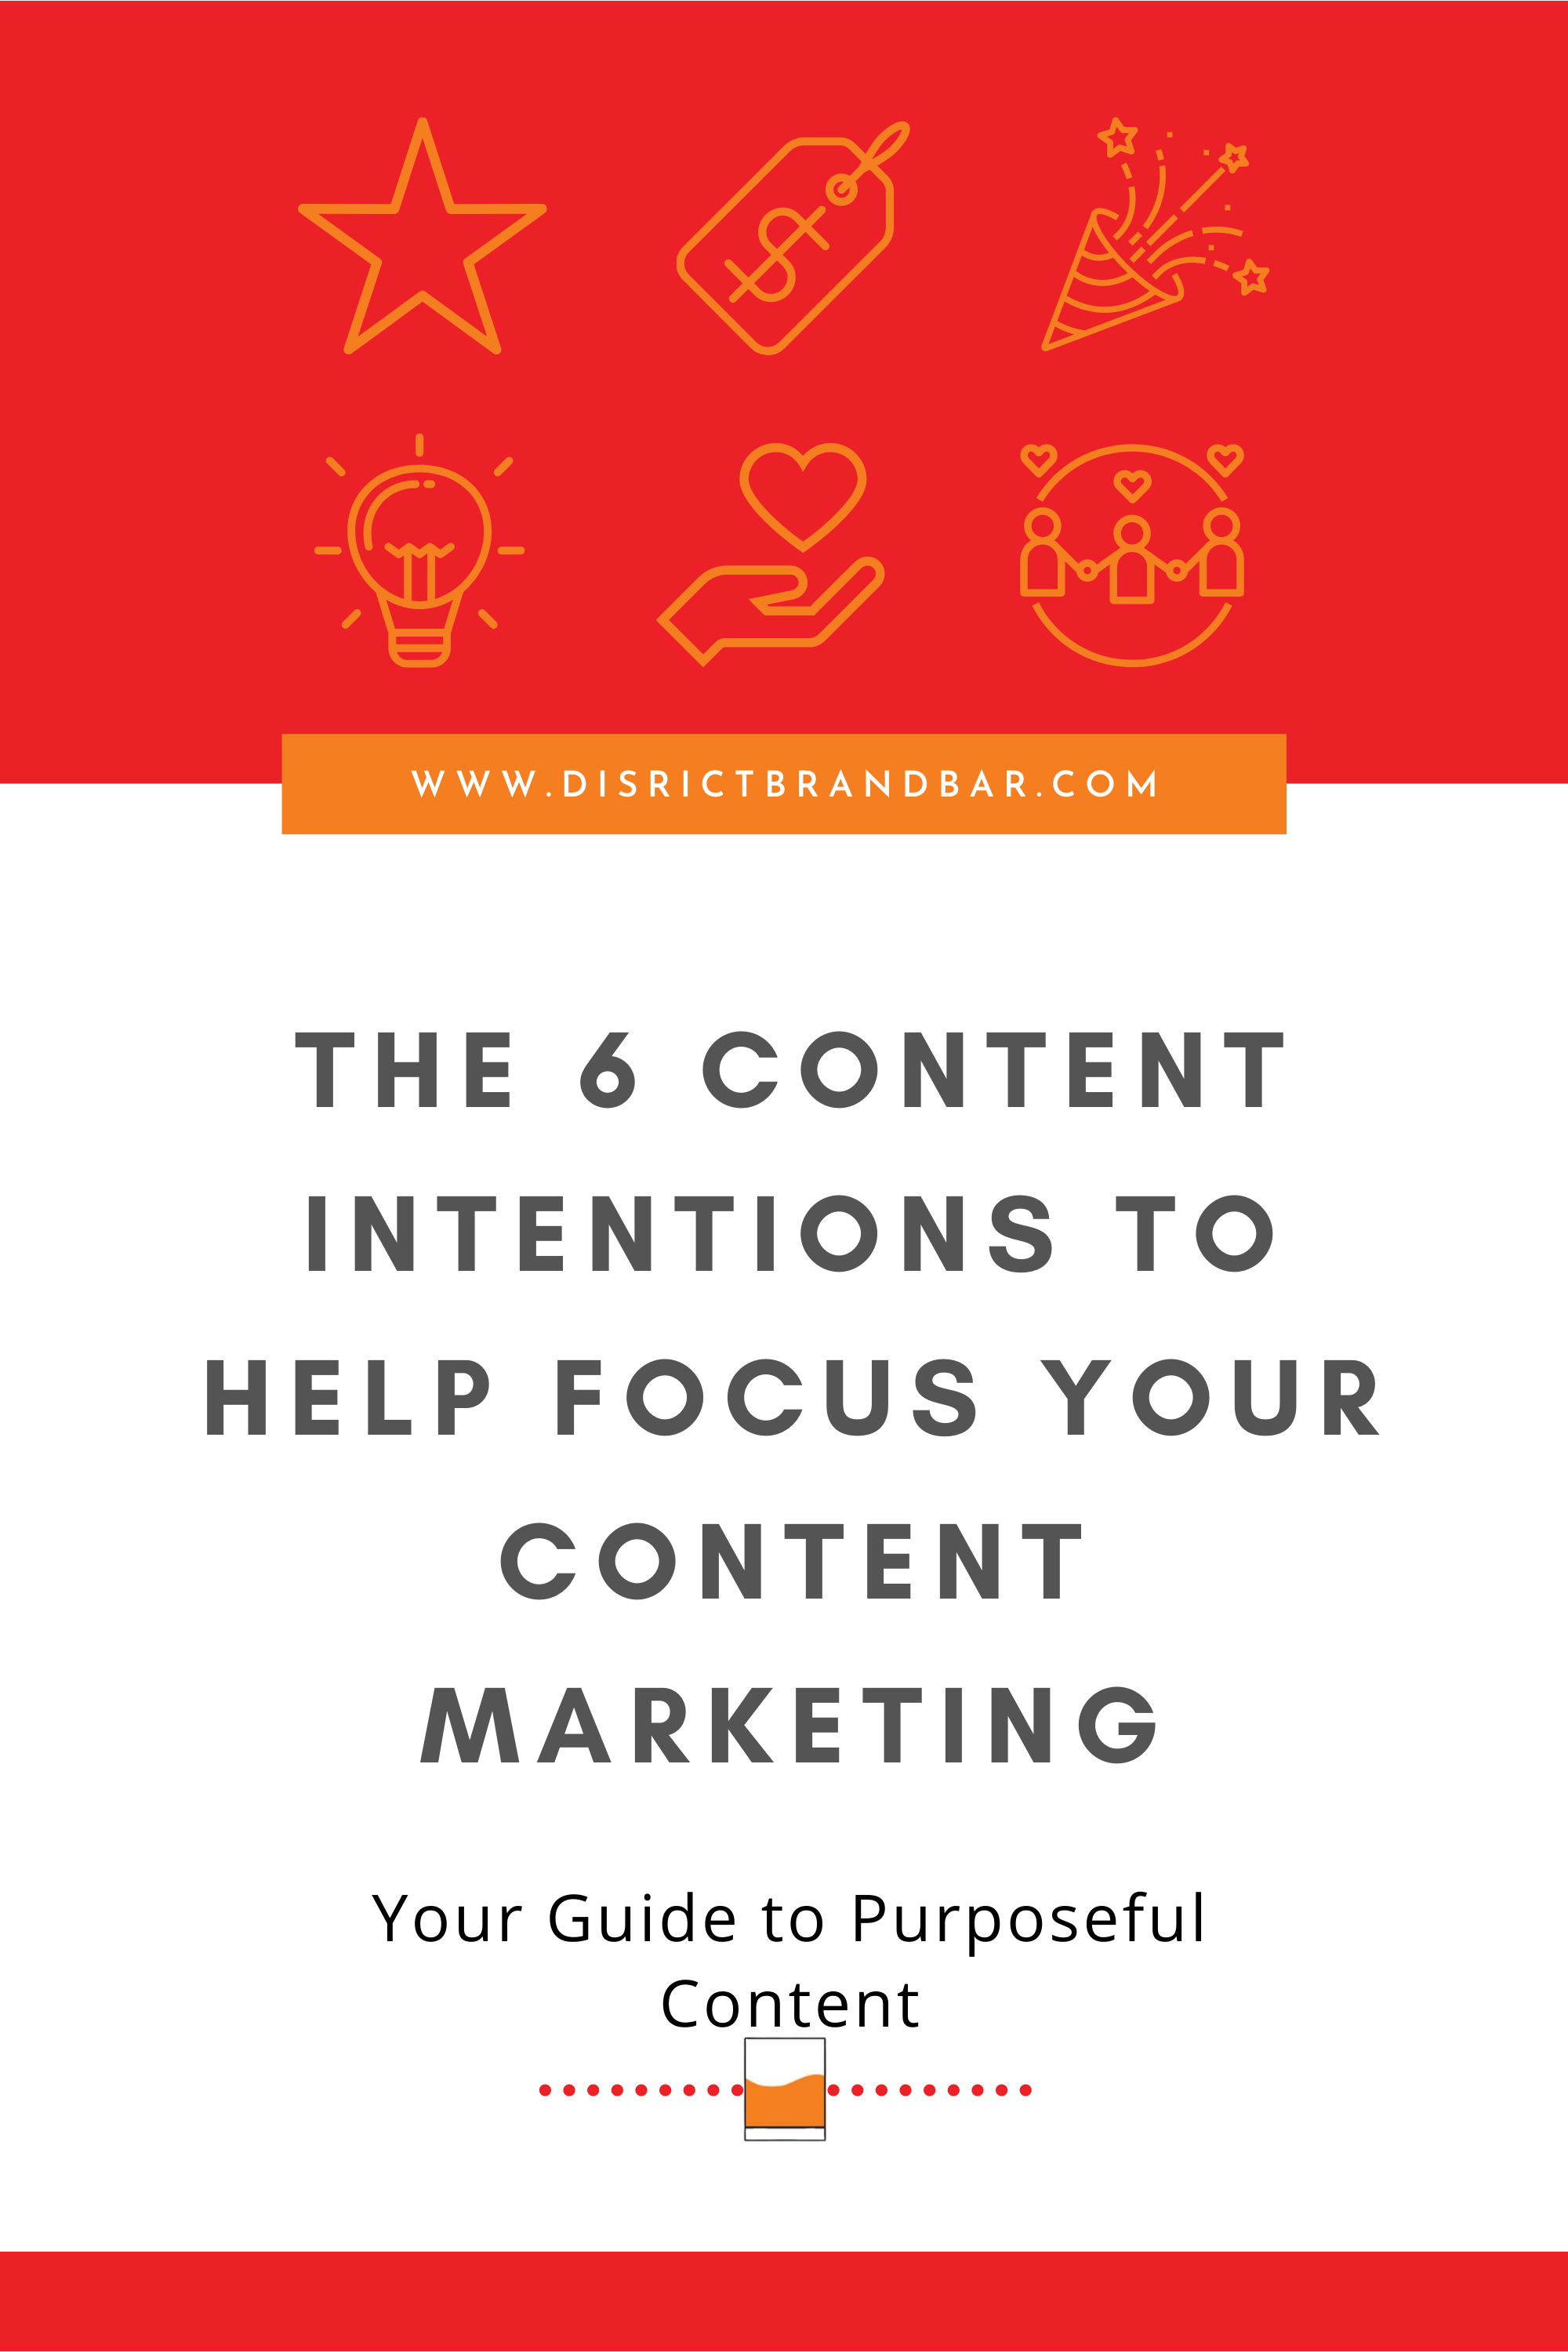 The 6 Content Intentions for Purposeful Content Marketing